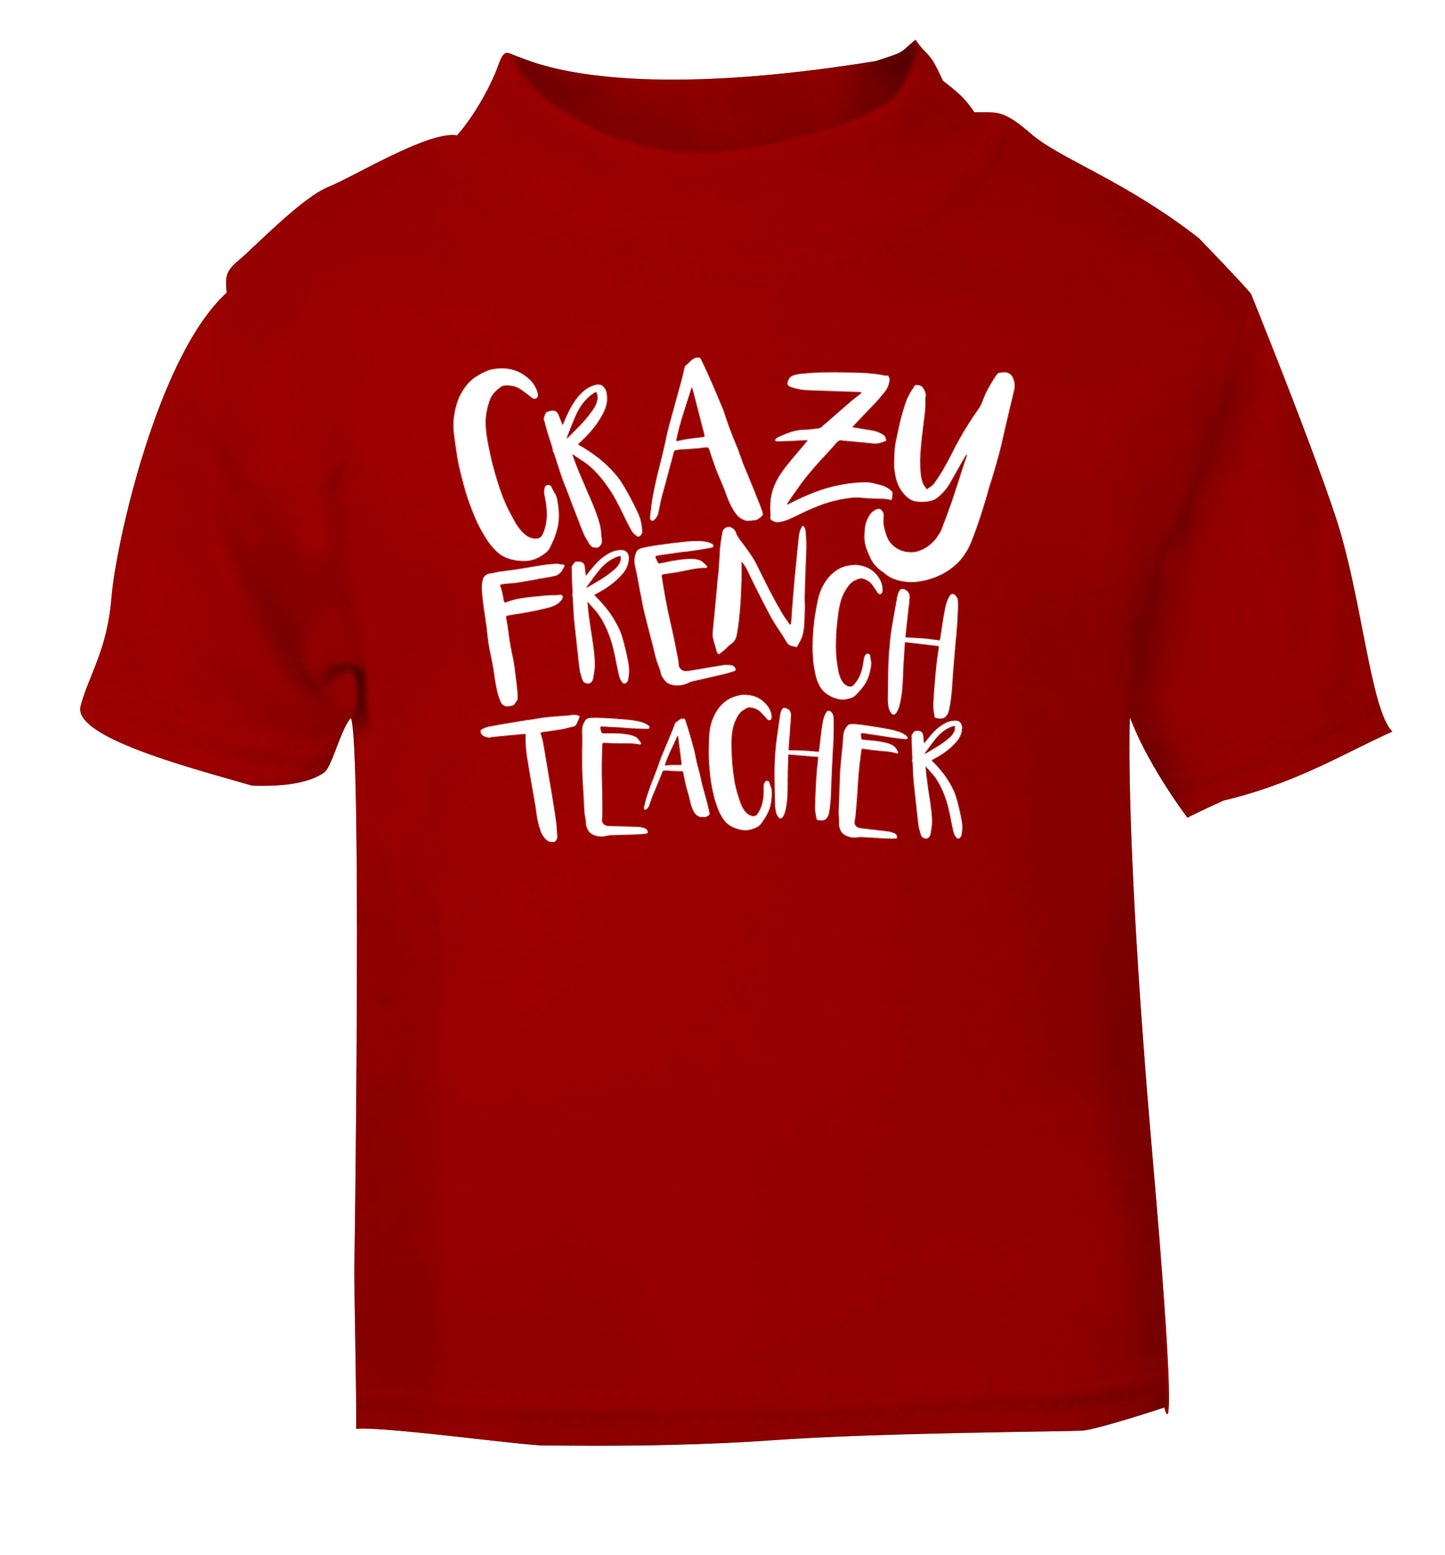 Crazy french teacher red Baby Toddler Tshirt 2 Years